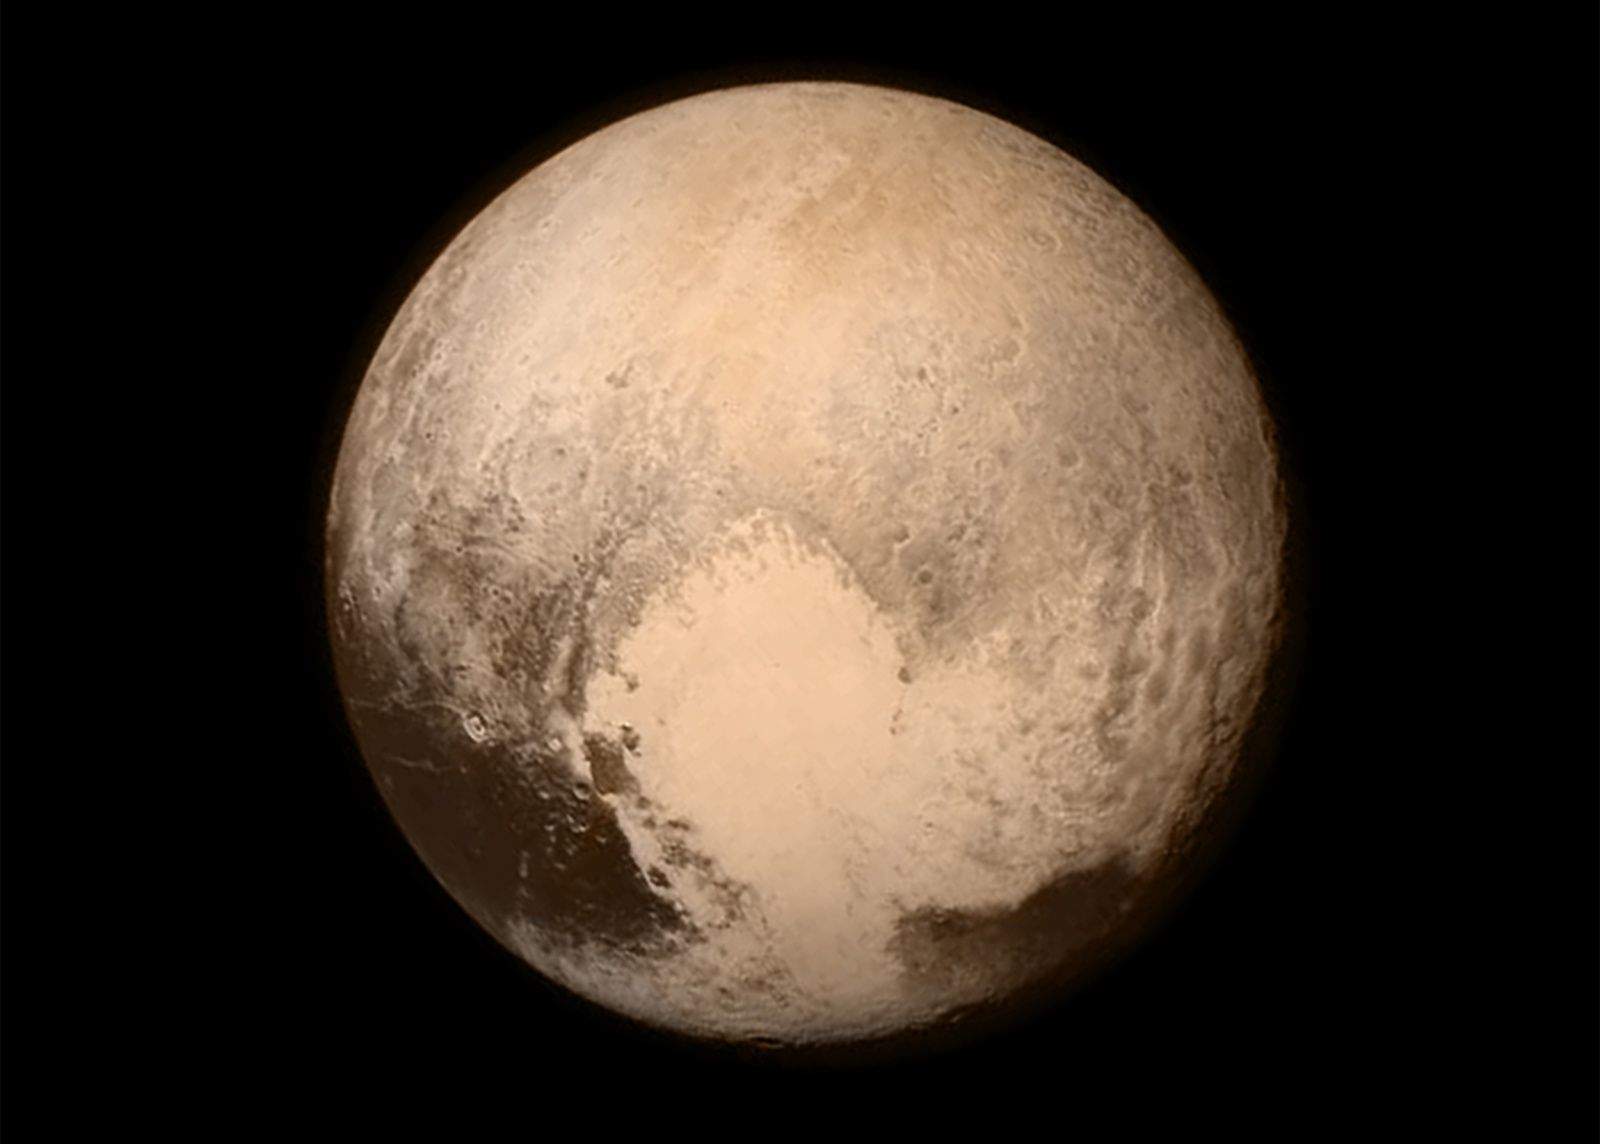 When NASA shared this image of Pluto with its Instagram followers Tuesday, scientists called it a love letter.